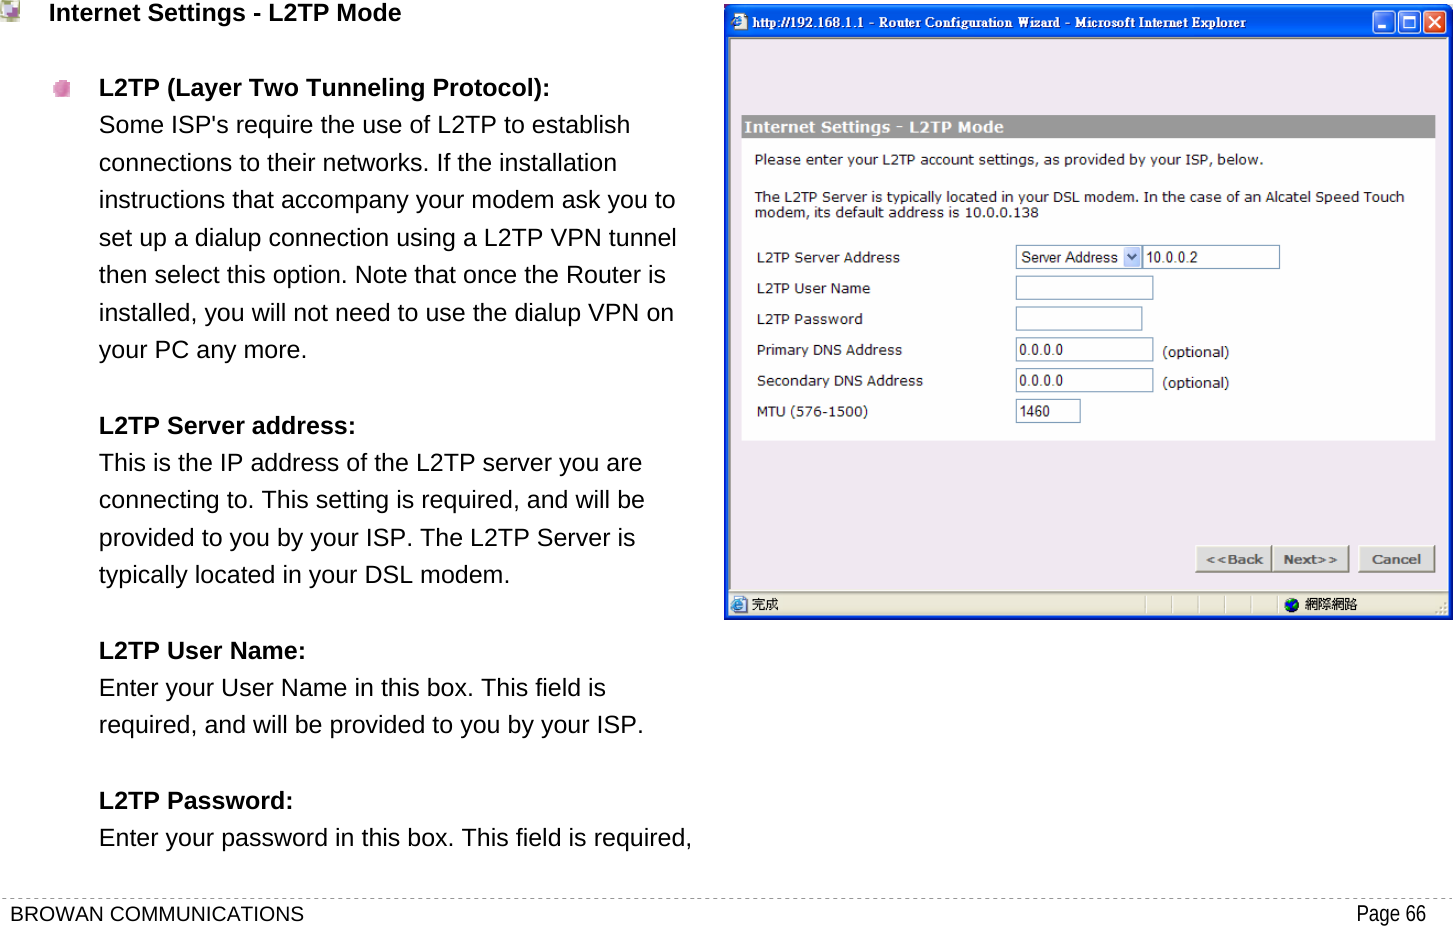 BROWAN COMMUNICATIONS                                                                                           Page 66   Internet Settings - L2TP Mode   L2TP (Layer Two Tunneling Protocol): Some ISP&apos;s require the use of L2TP to establish connections to their networks. If the installation instructions that accompany your modem ask you to set up a dialup connection using a L2TP VPN tunnel then select this option. Note that once the Router is installed, you will not need to use the dialup VPN on your PC any more.  L2TP Server address: This is the IP address of the L2TP server you are connecting to. This setting is required, and will be provided to you by your ISP. The L2TP Server is typically located in your DSL modem.  L2TP User Name: Enter your User Name in this box. This field is required, and will be provided to you by your ISP.  L2TP Password: Enter your password in this box. This field is required,  